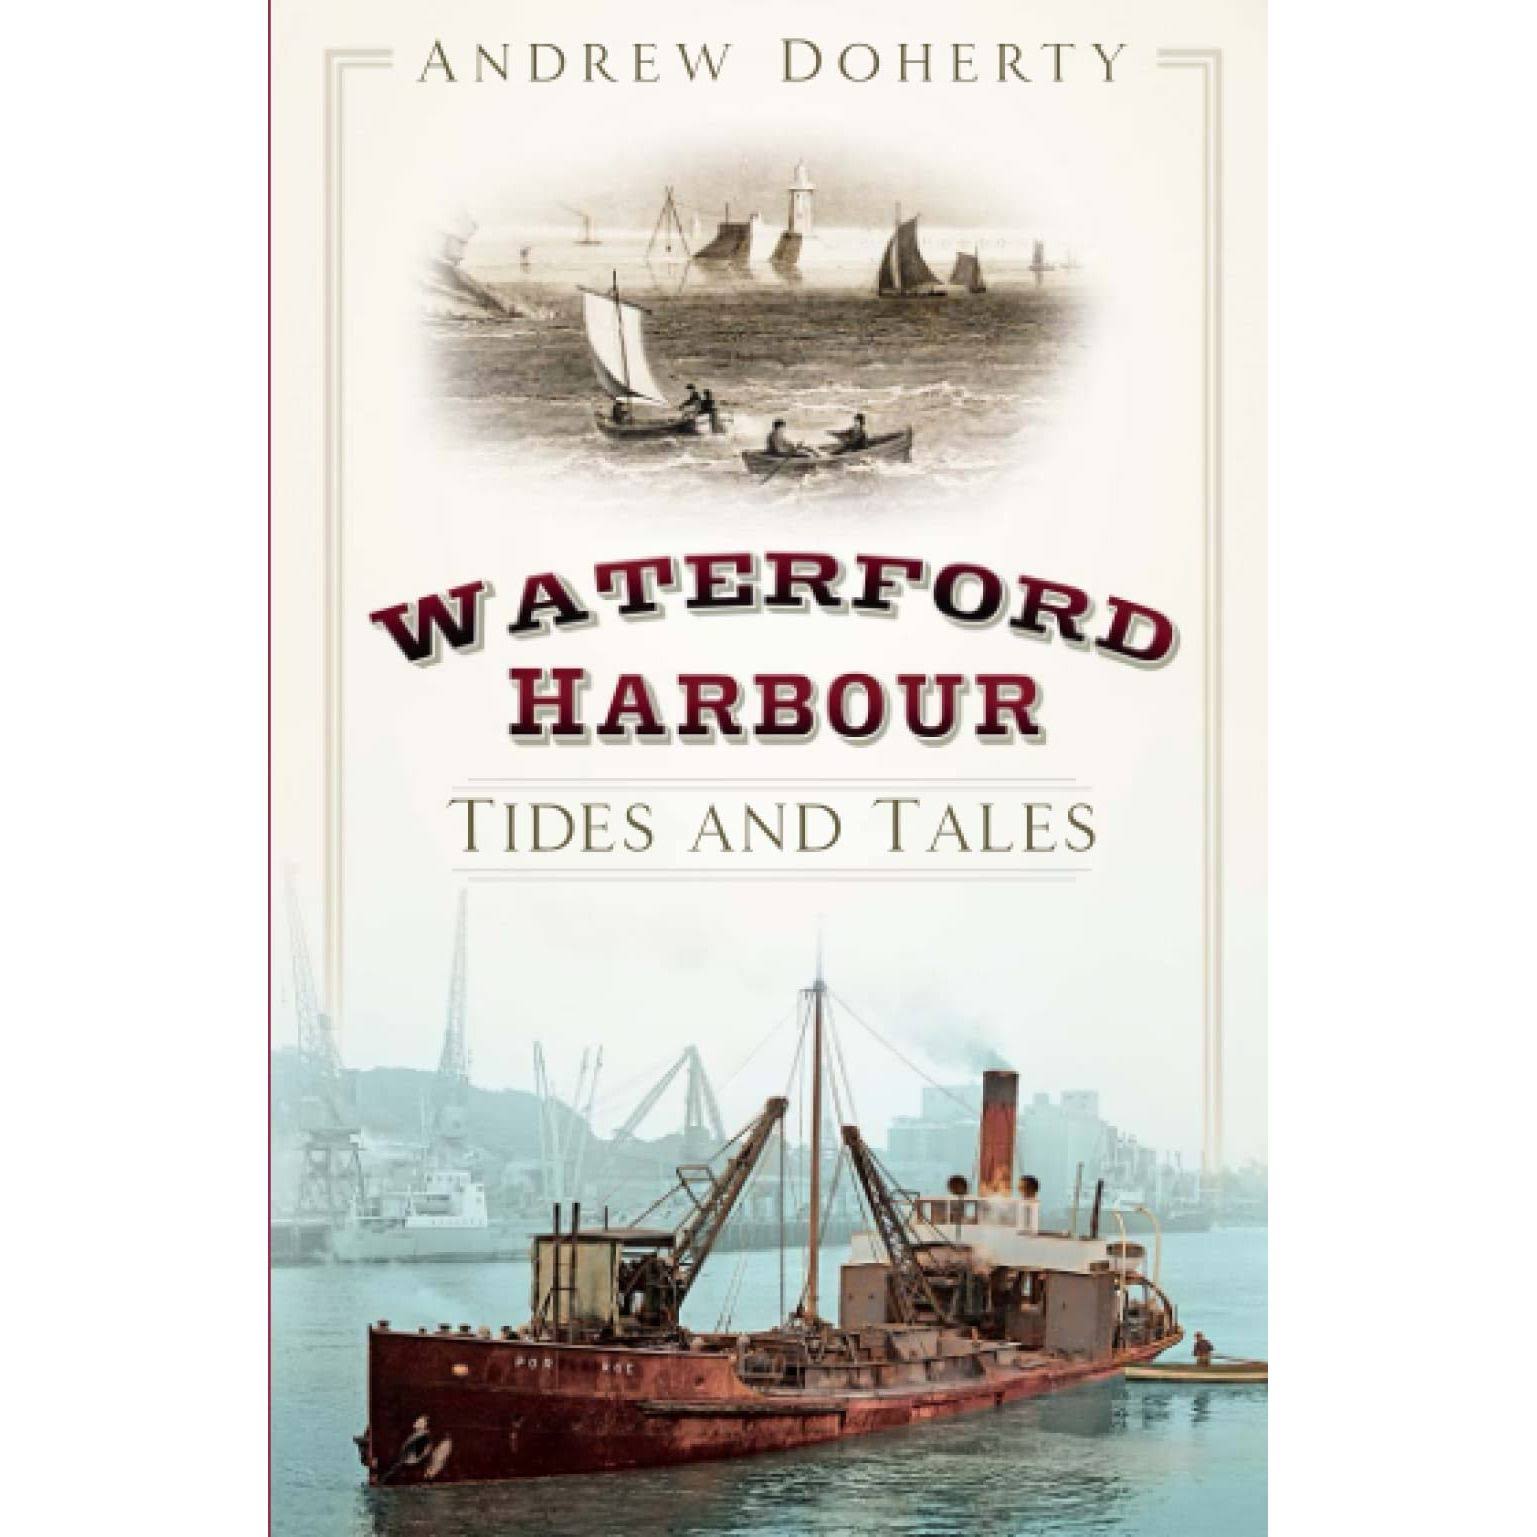 Waterford Harbour: Tides and Tales [Book]